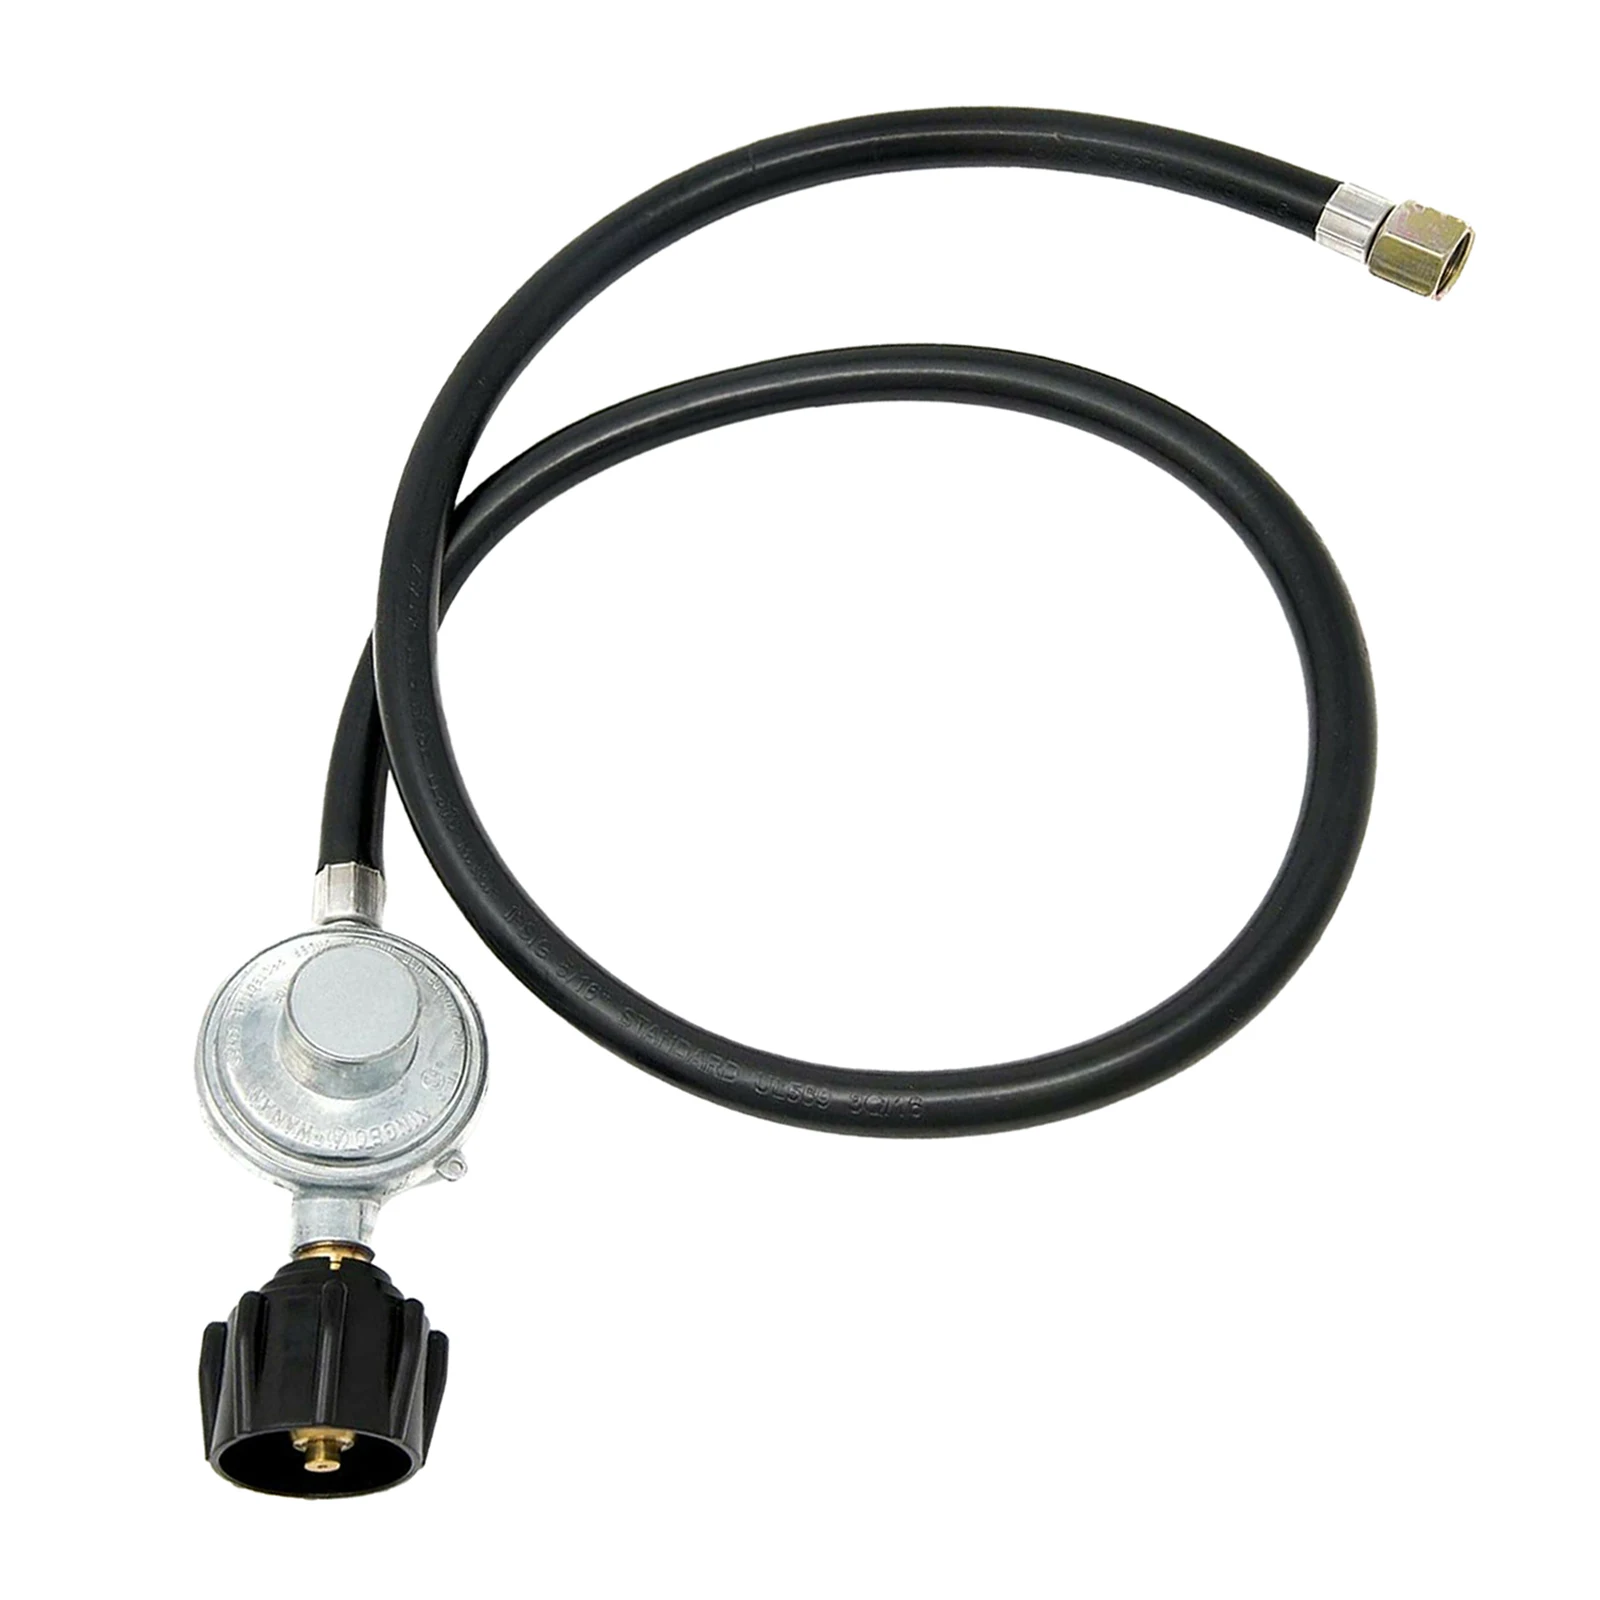 Low Pressure  Regulator with Hose for Gas Smoker,  Fire , Heater, 3/8inch Female  Nut